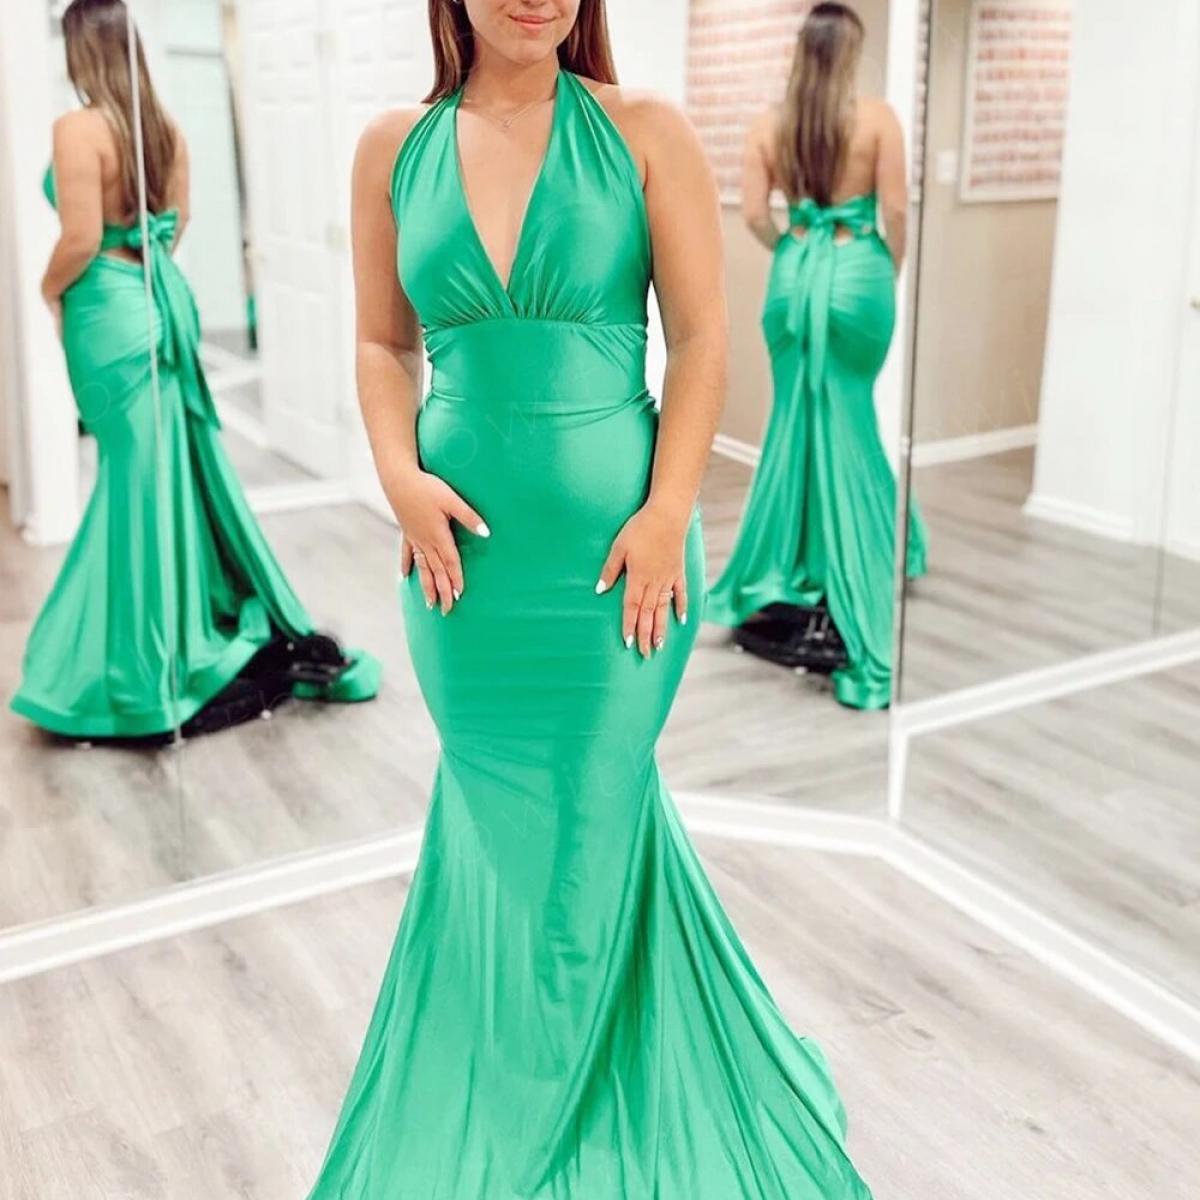 Bowith Halter Luxury Dress For Gala Party 2023 With Bow Tie Back Mermaid Celebrity Dresses Satin Elegant Woman Dress For